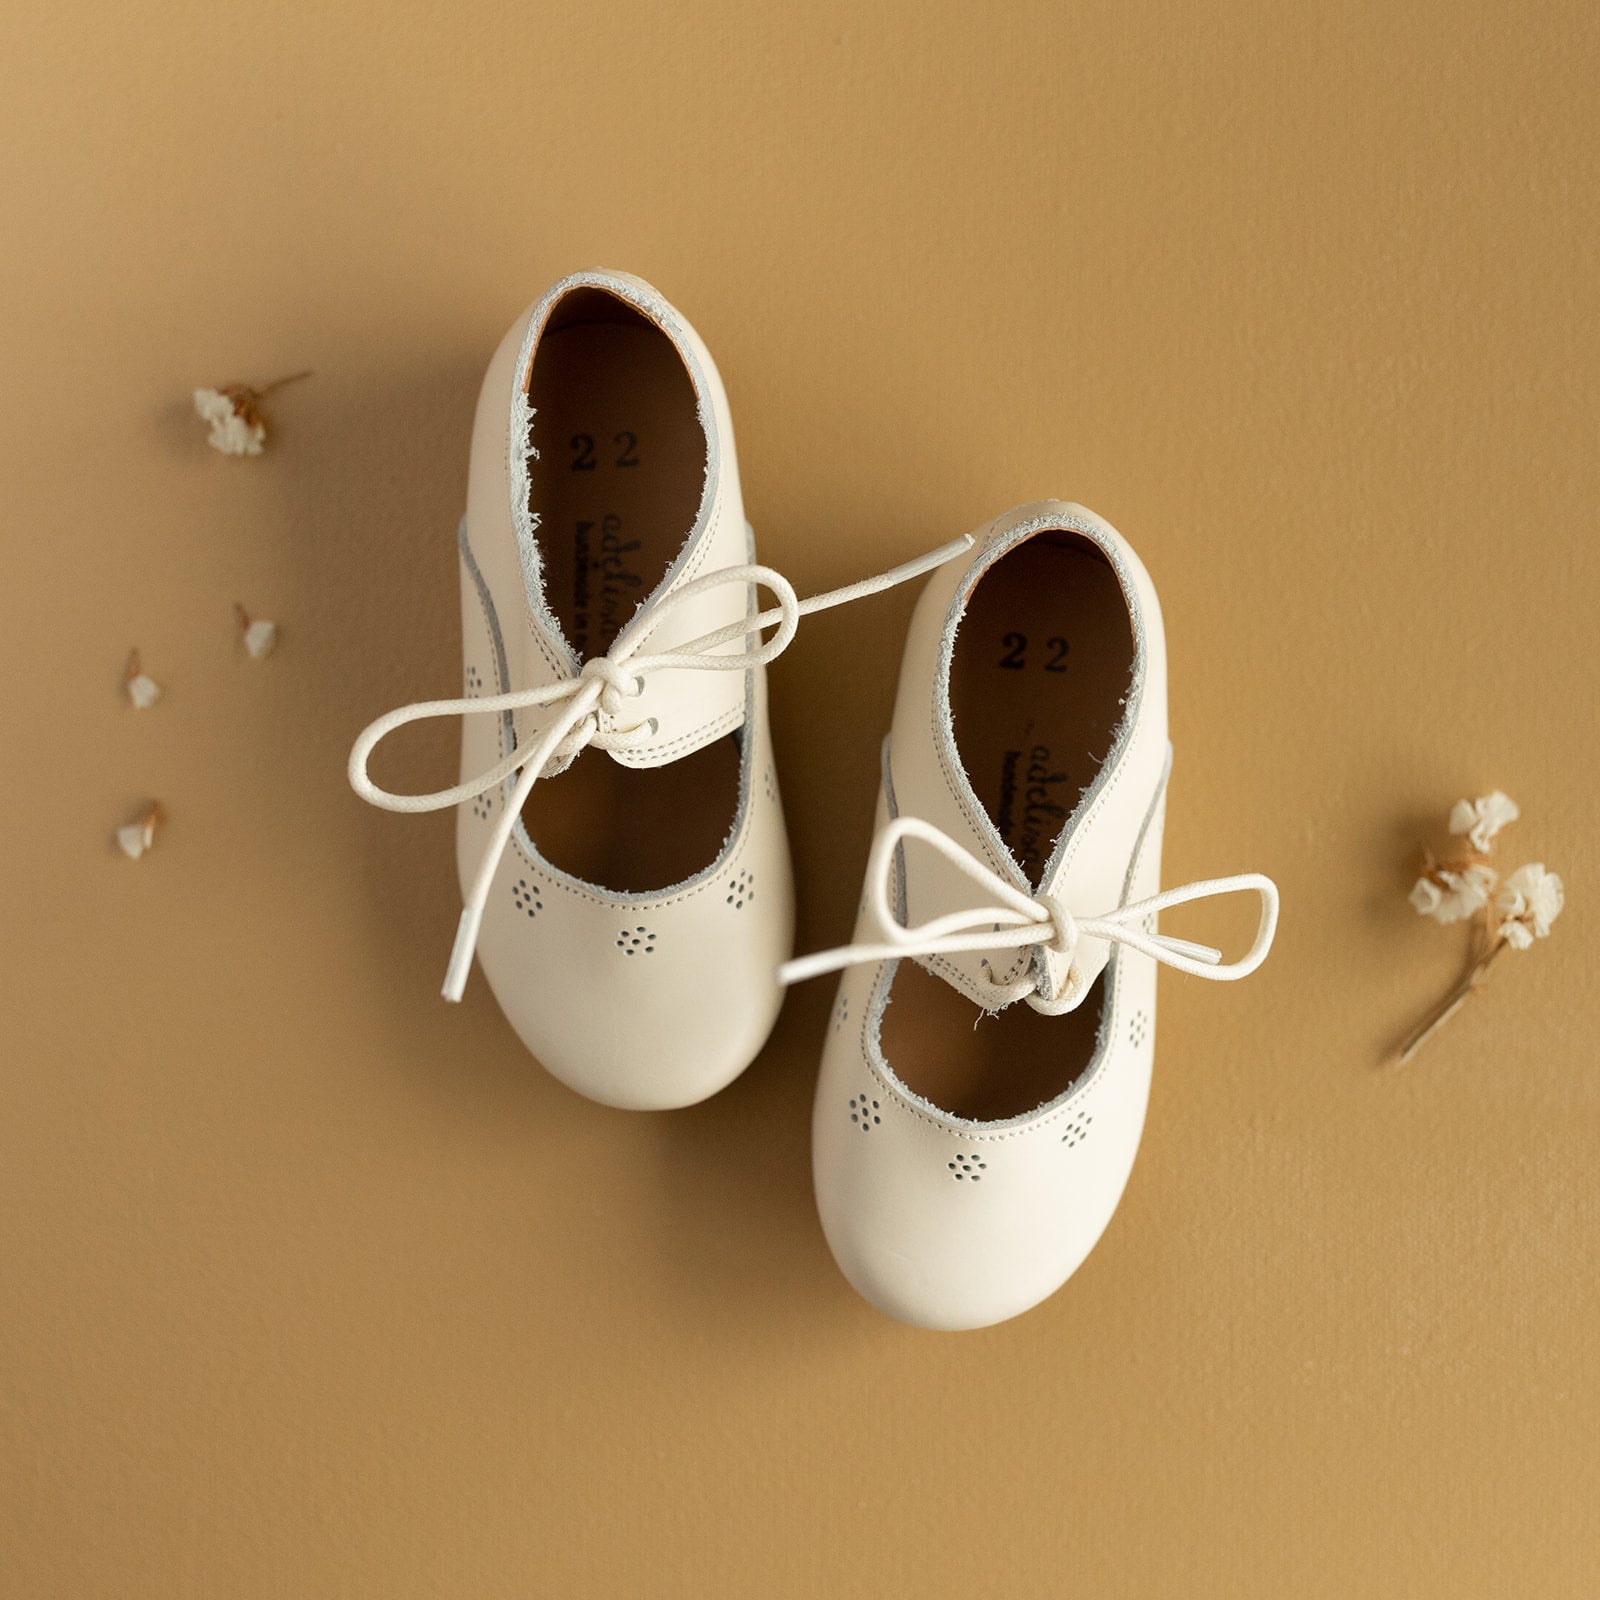 Adelisa & Co cream leather Mary Jane shoes for girls. Style Sol Oxford Flats.